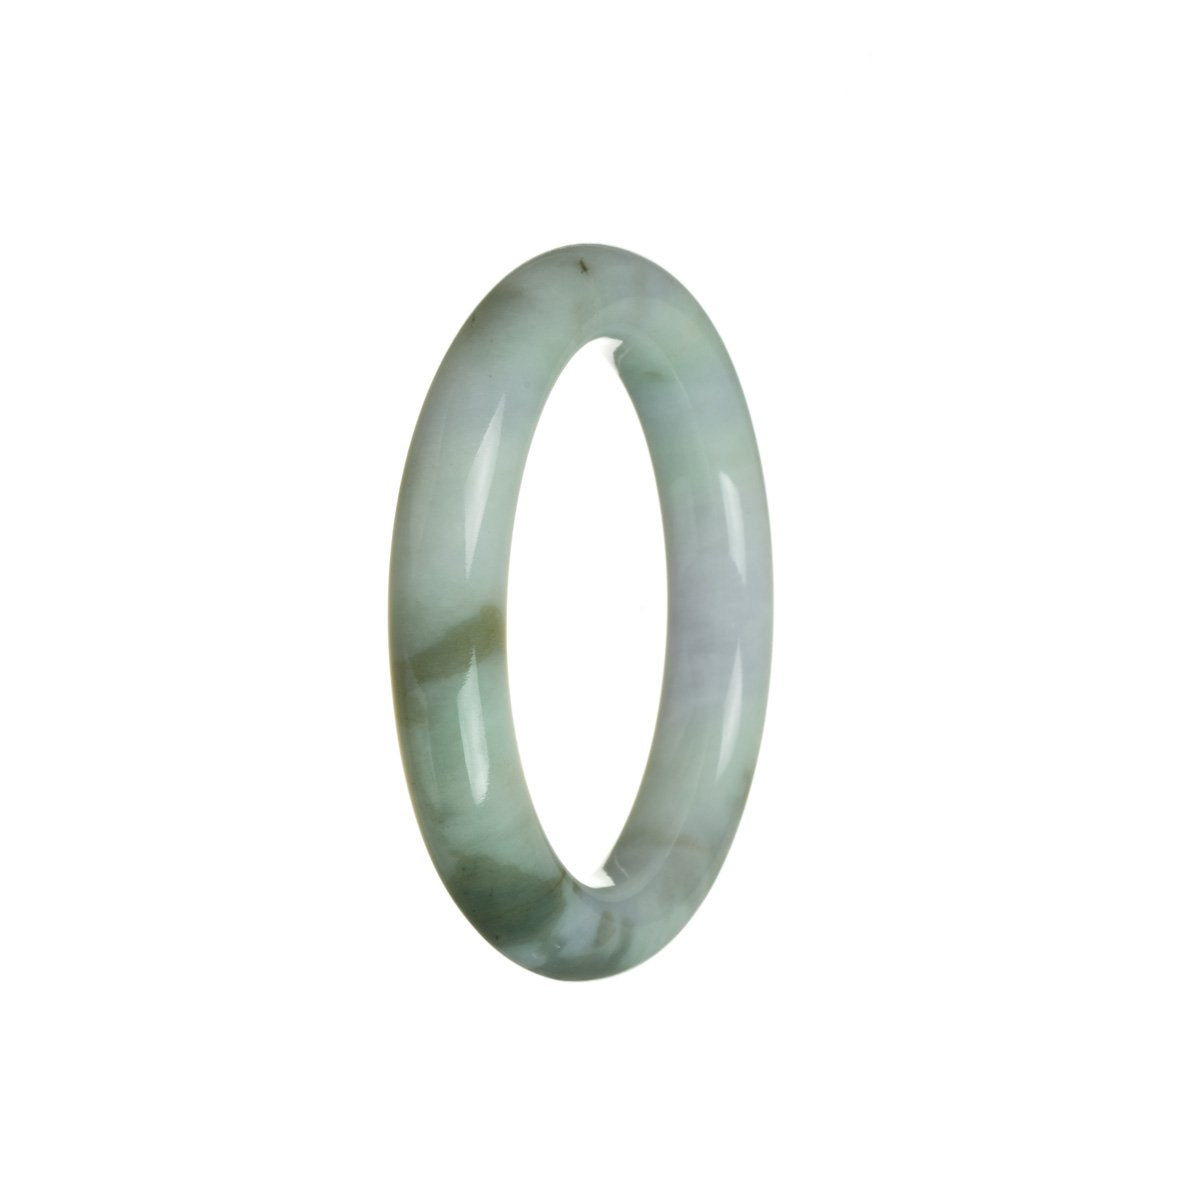 Genuine Natural Green with Lavender and White Jade Bangle Bracelet - 52mm Semi Round